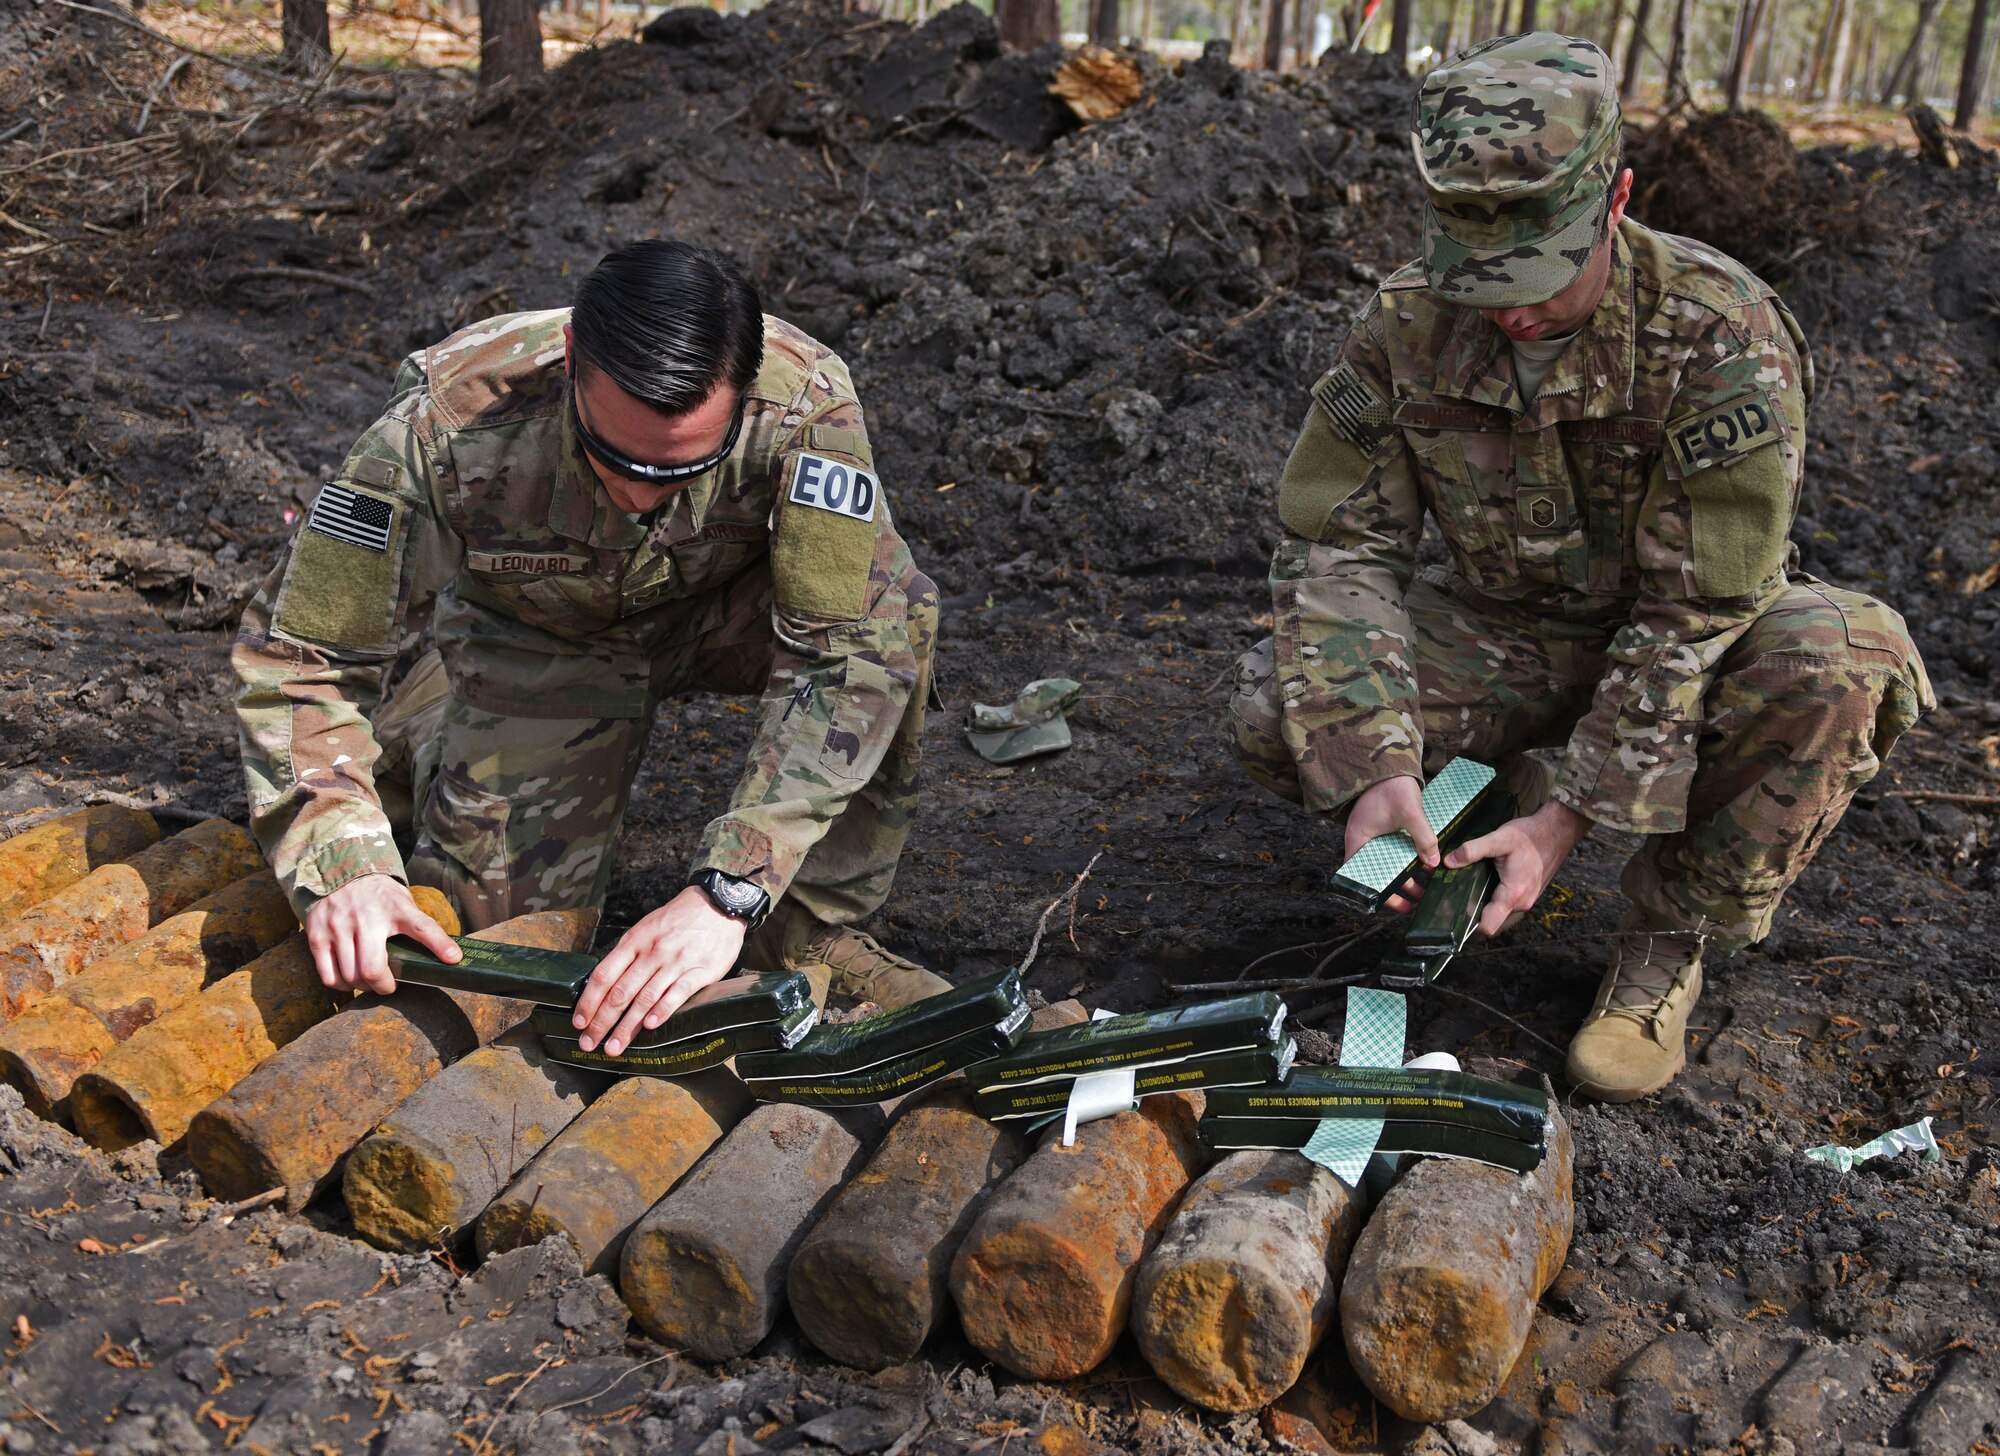 U.S. Air Force Staff Sgt. Benjamin Leonard, 20th Civil Engineering Squadron (CES) explosive ordinance disposal (EOD) journeyman, left, and Master Sgt. Nathanael Lindsay, 20th CES EOD flight chief, work together to place blocks of C4 explosives on top of unexploded ordinance (UXO) in Conway, S.C., April 4, 2018.